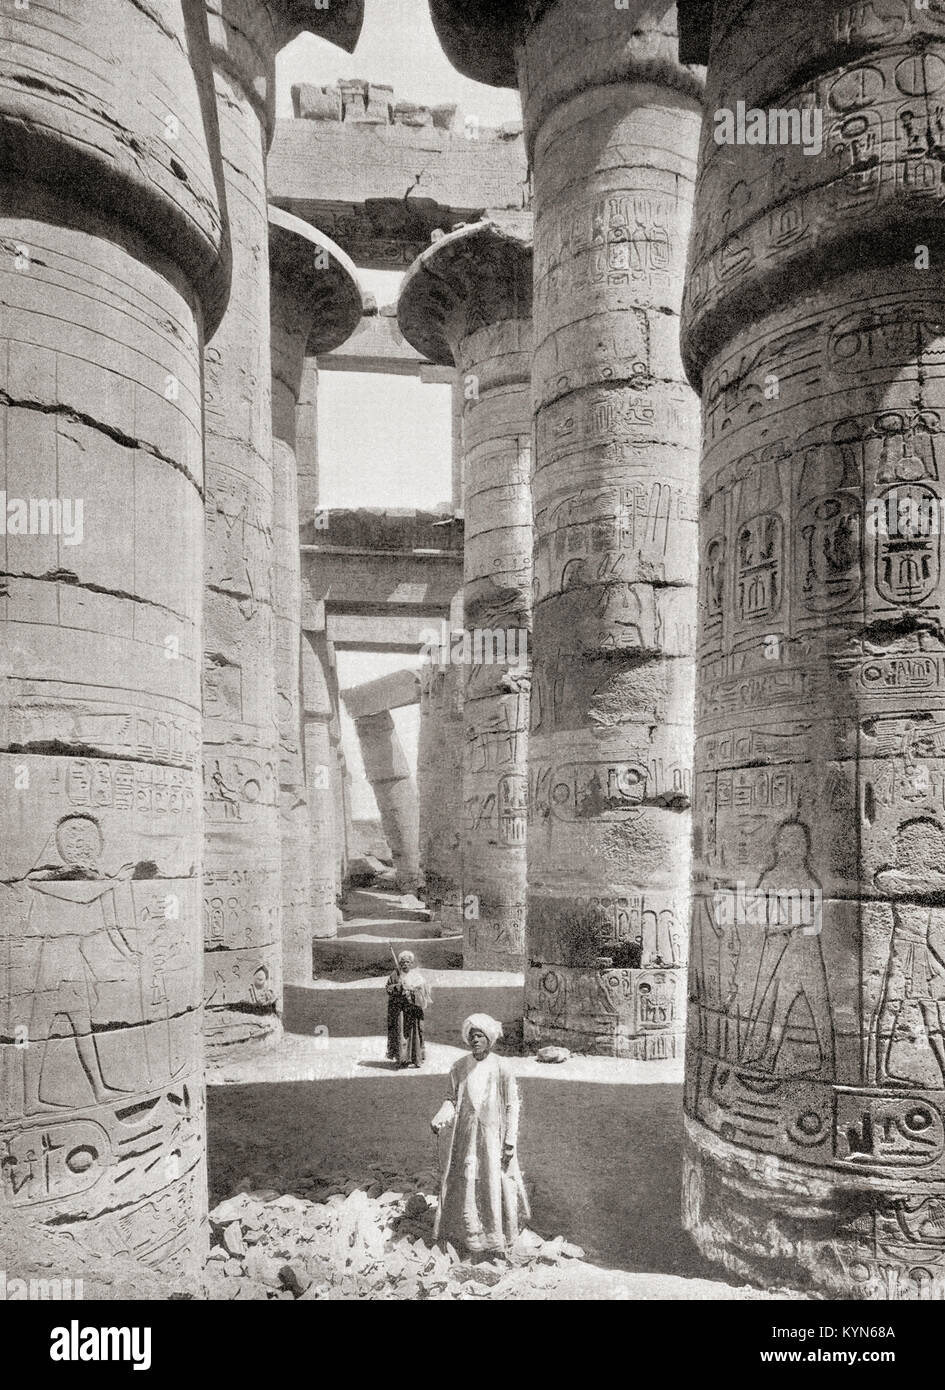 Pillars of the Great Hypostyle Hall from the Precinct of Amun-Re in the Great Temple at Karnak, Egypt.   From The Wonders of the World, published c.1920. Stock Photo